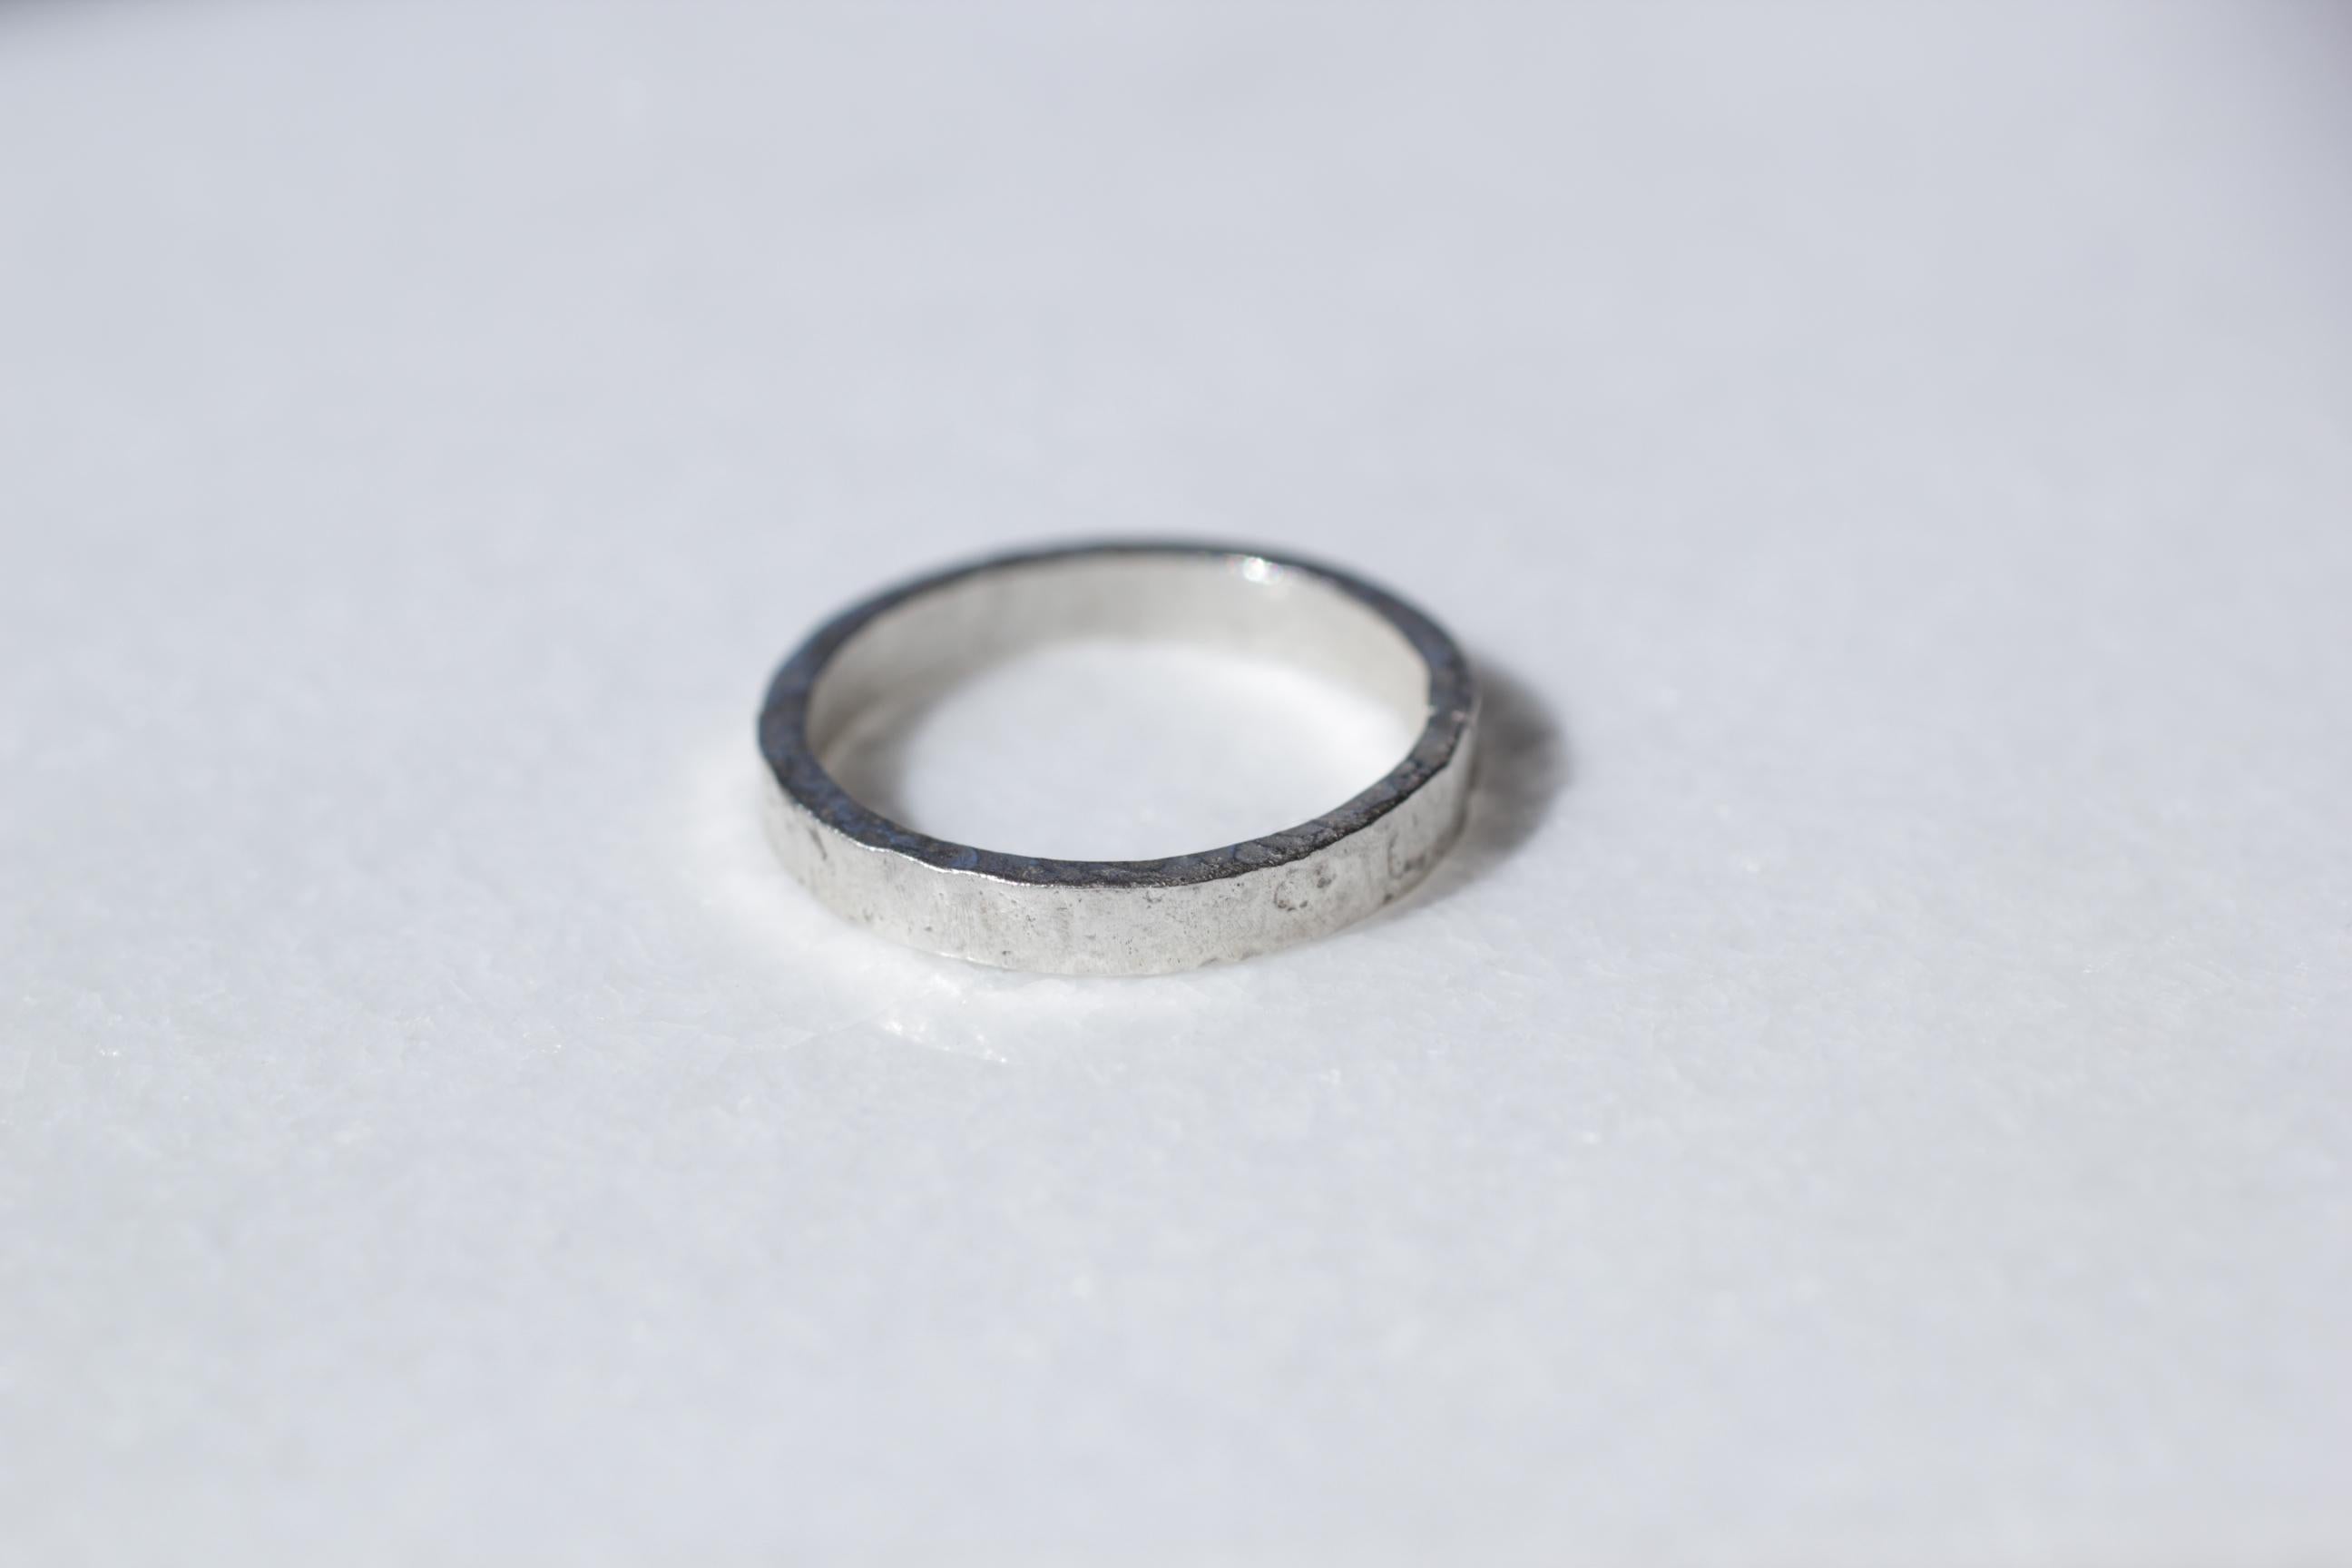 Simplicity Wide Band contemporary unisex design by AB Jewelry.
For sale here is a hand finished wedding band ring in sterling silver. Created for a man or a woman. 

Process: This striking ring is first hand forged in 21k gold, then cast in various